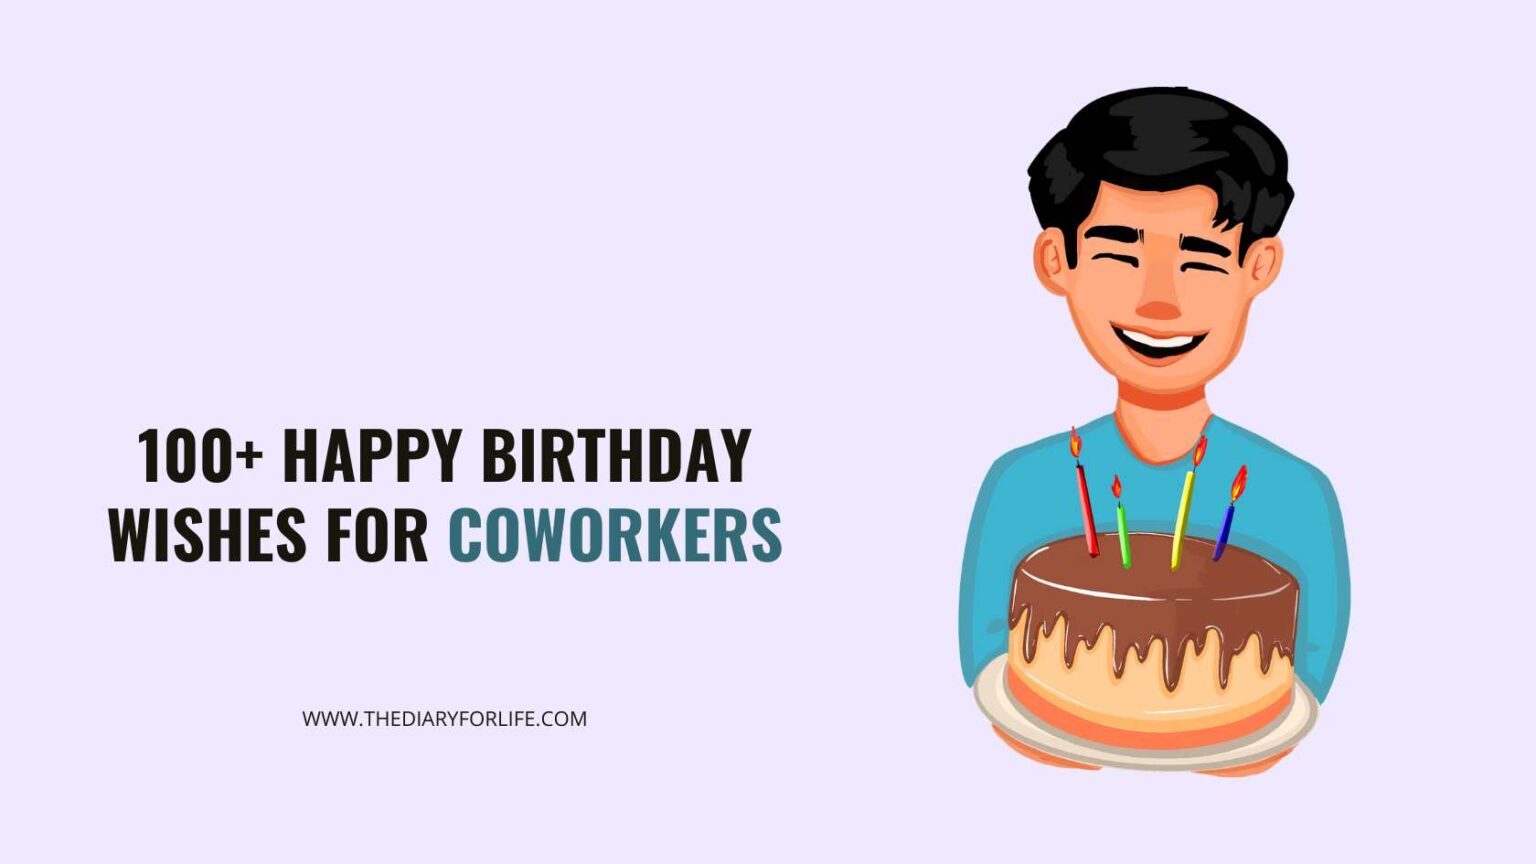 100+ Happy Birthday Wishes For Coworkers - ThediaryforLife